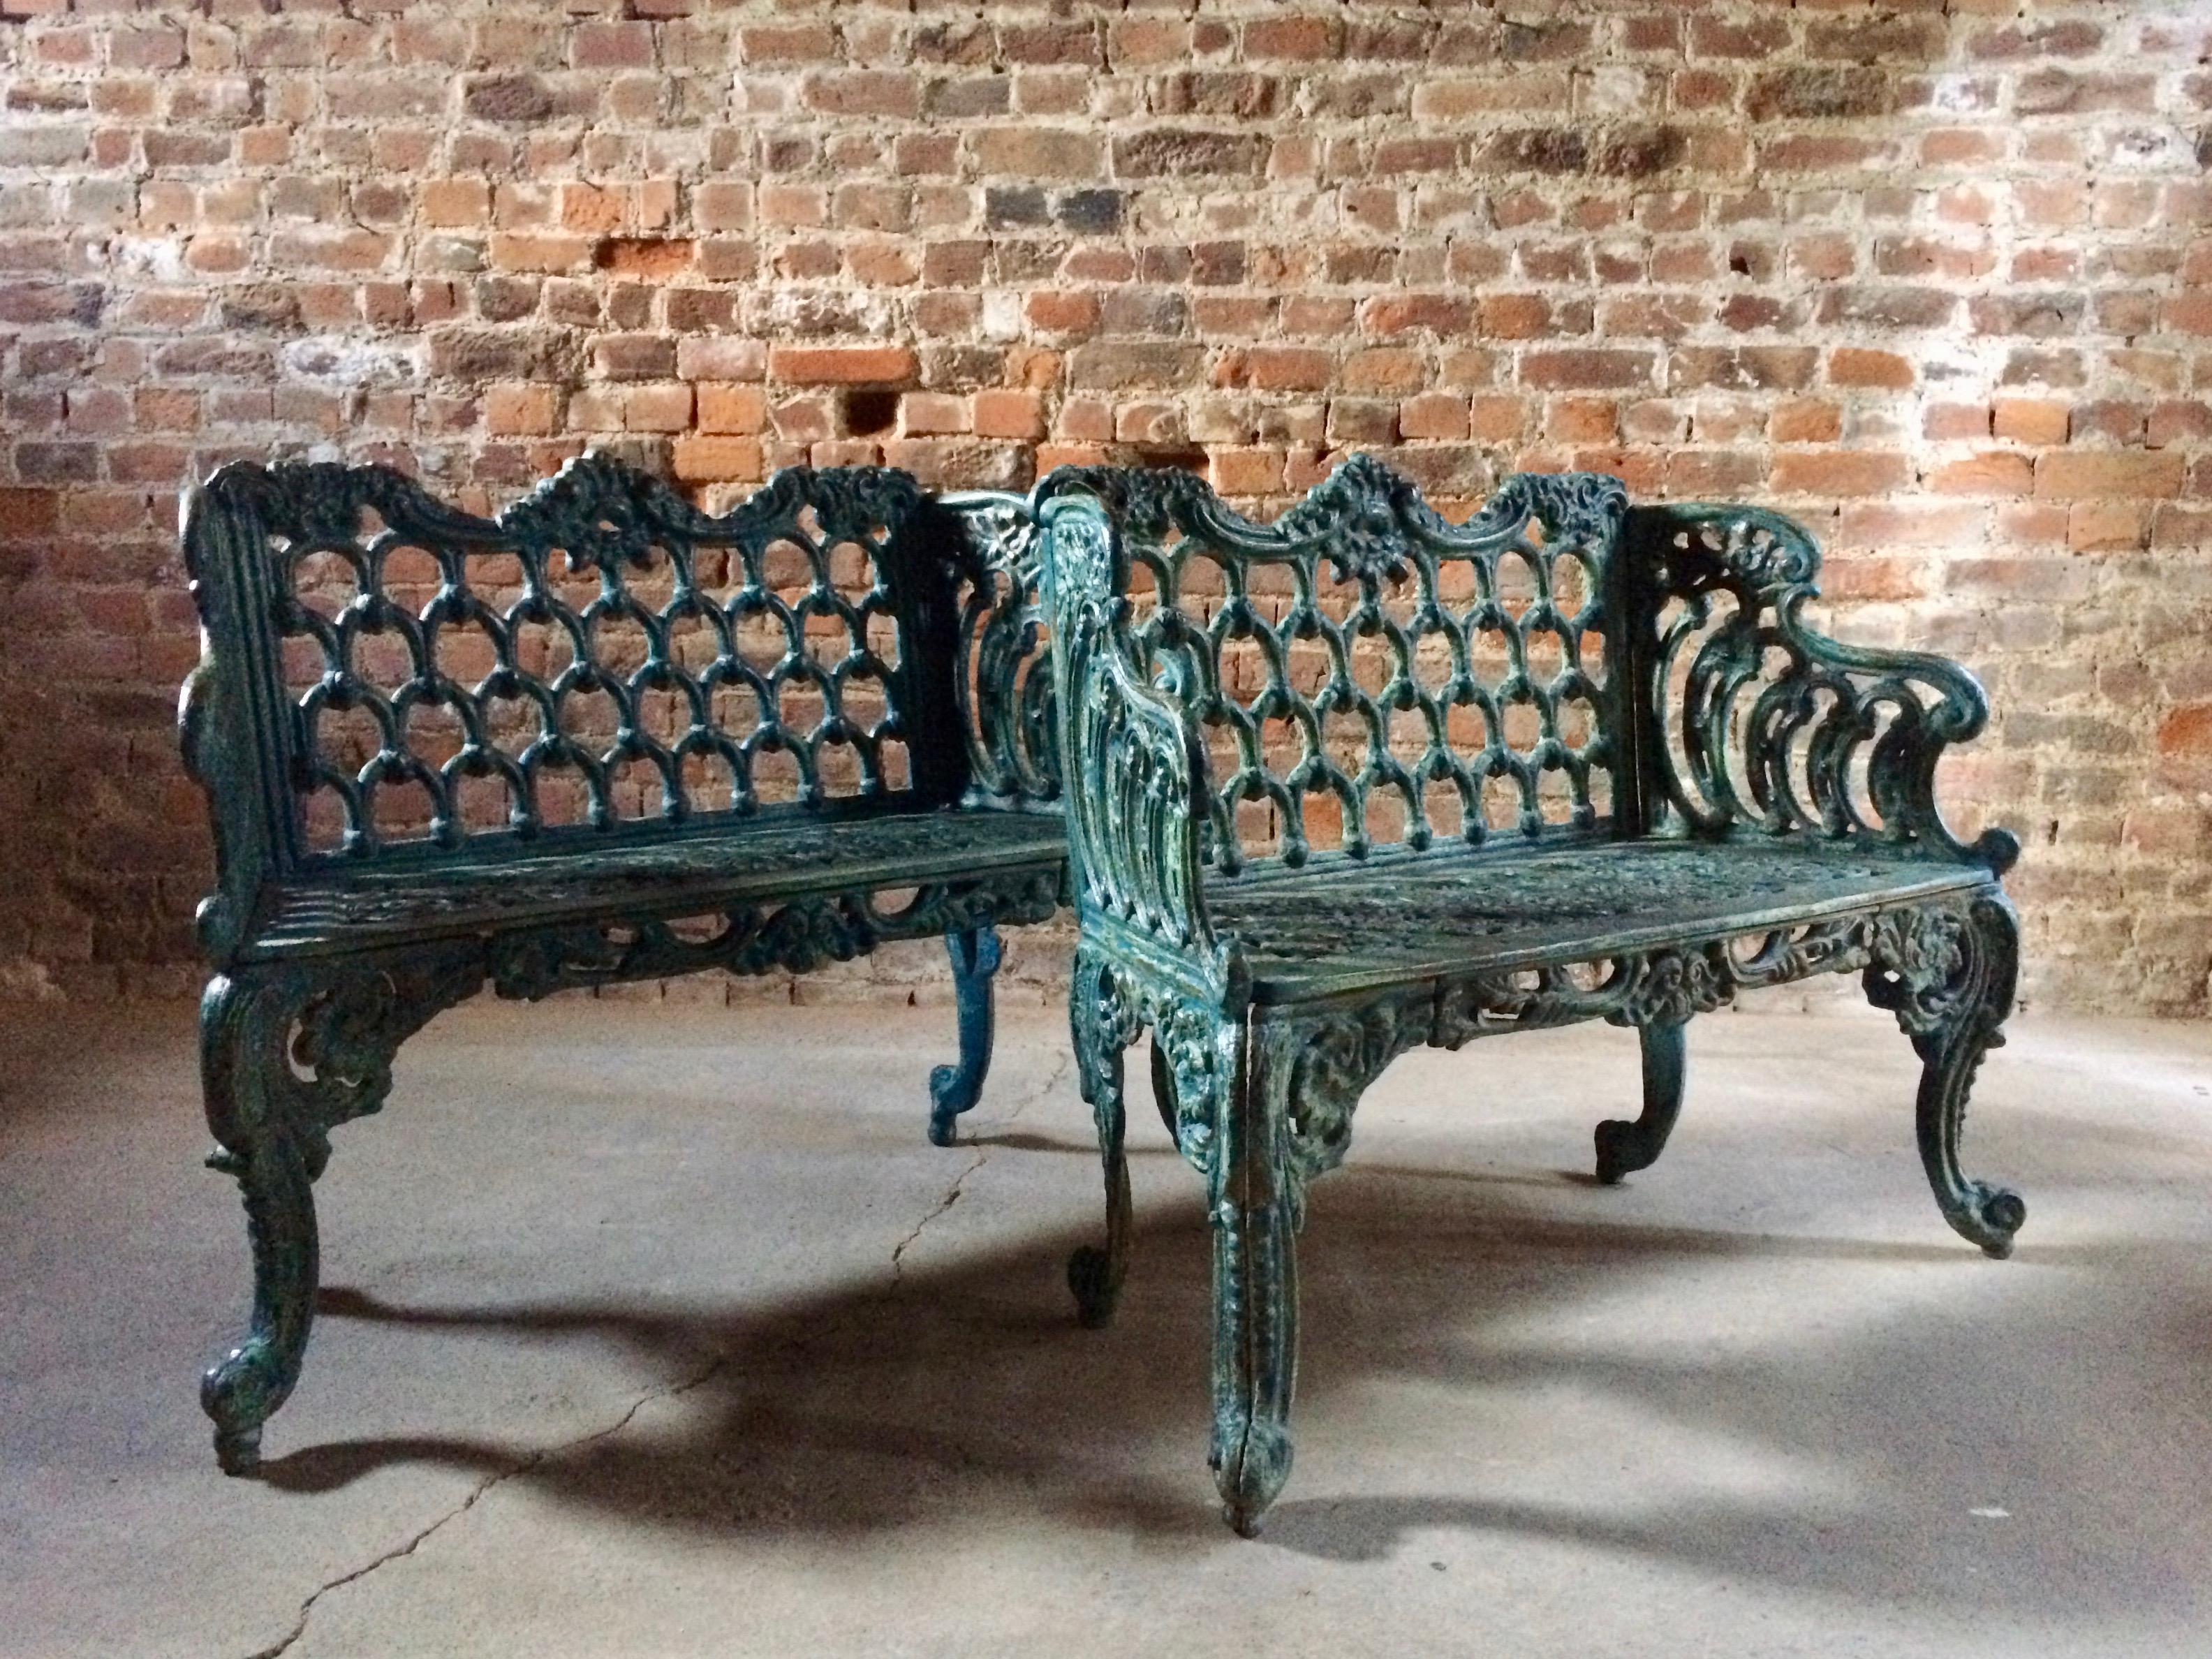 A pair of breathtakingly beautiful antique benches made from cast iron in the Coalbrookdale style dating to late 19th century.

The benches are rich in age and history and boast a wonderful patina that can only come naturally over time.

These